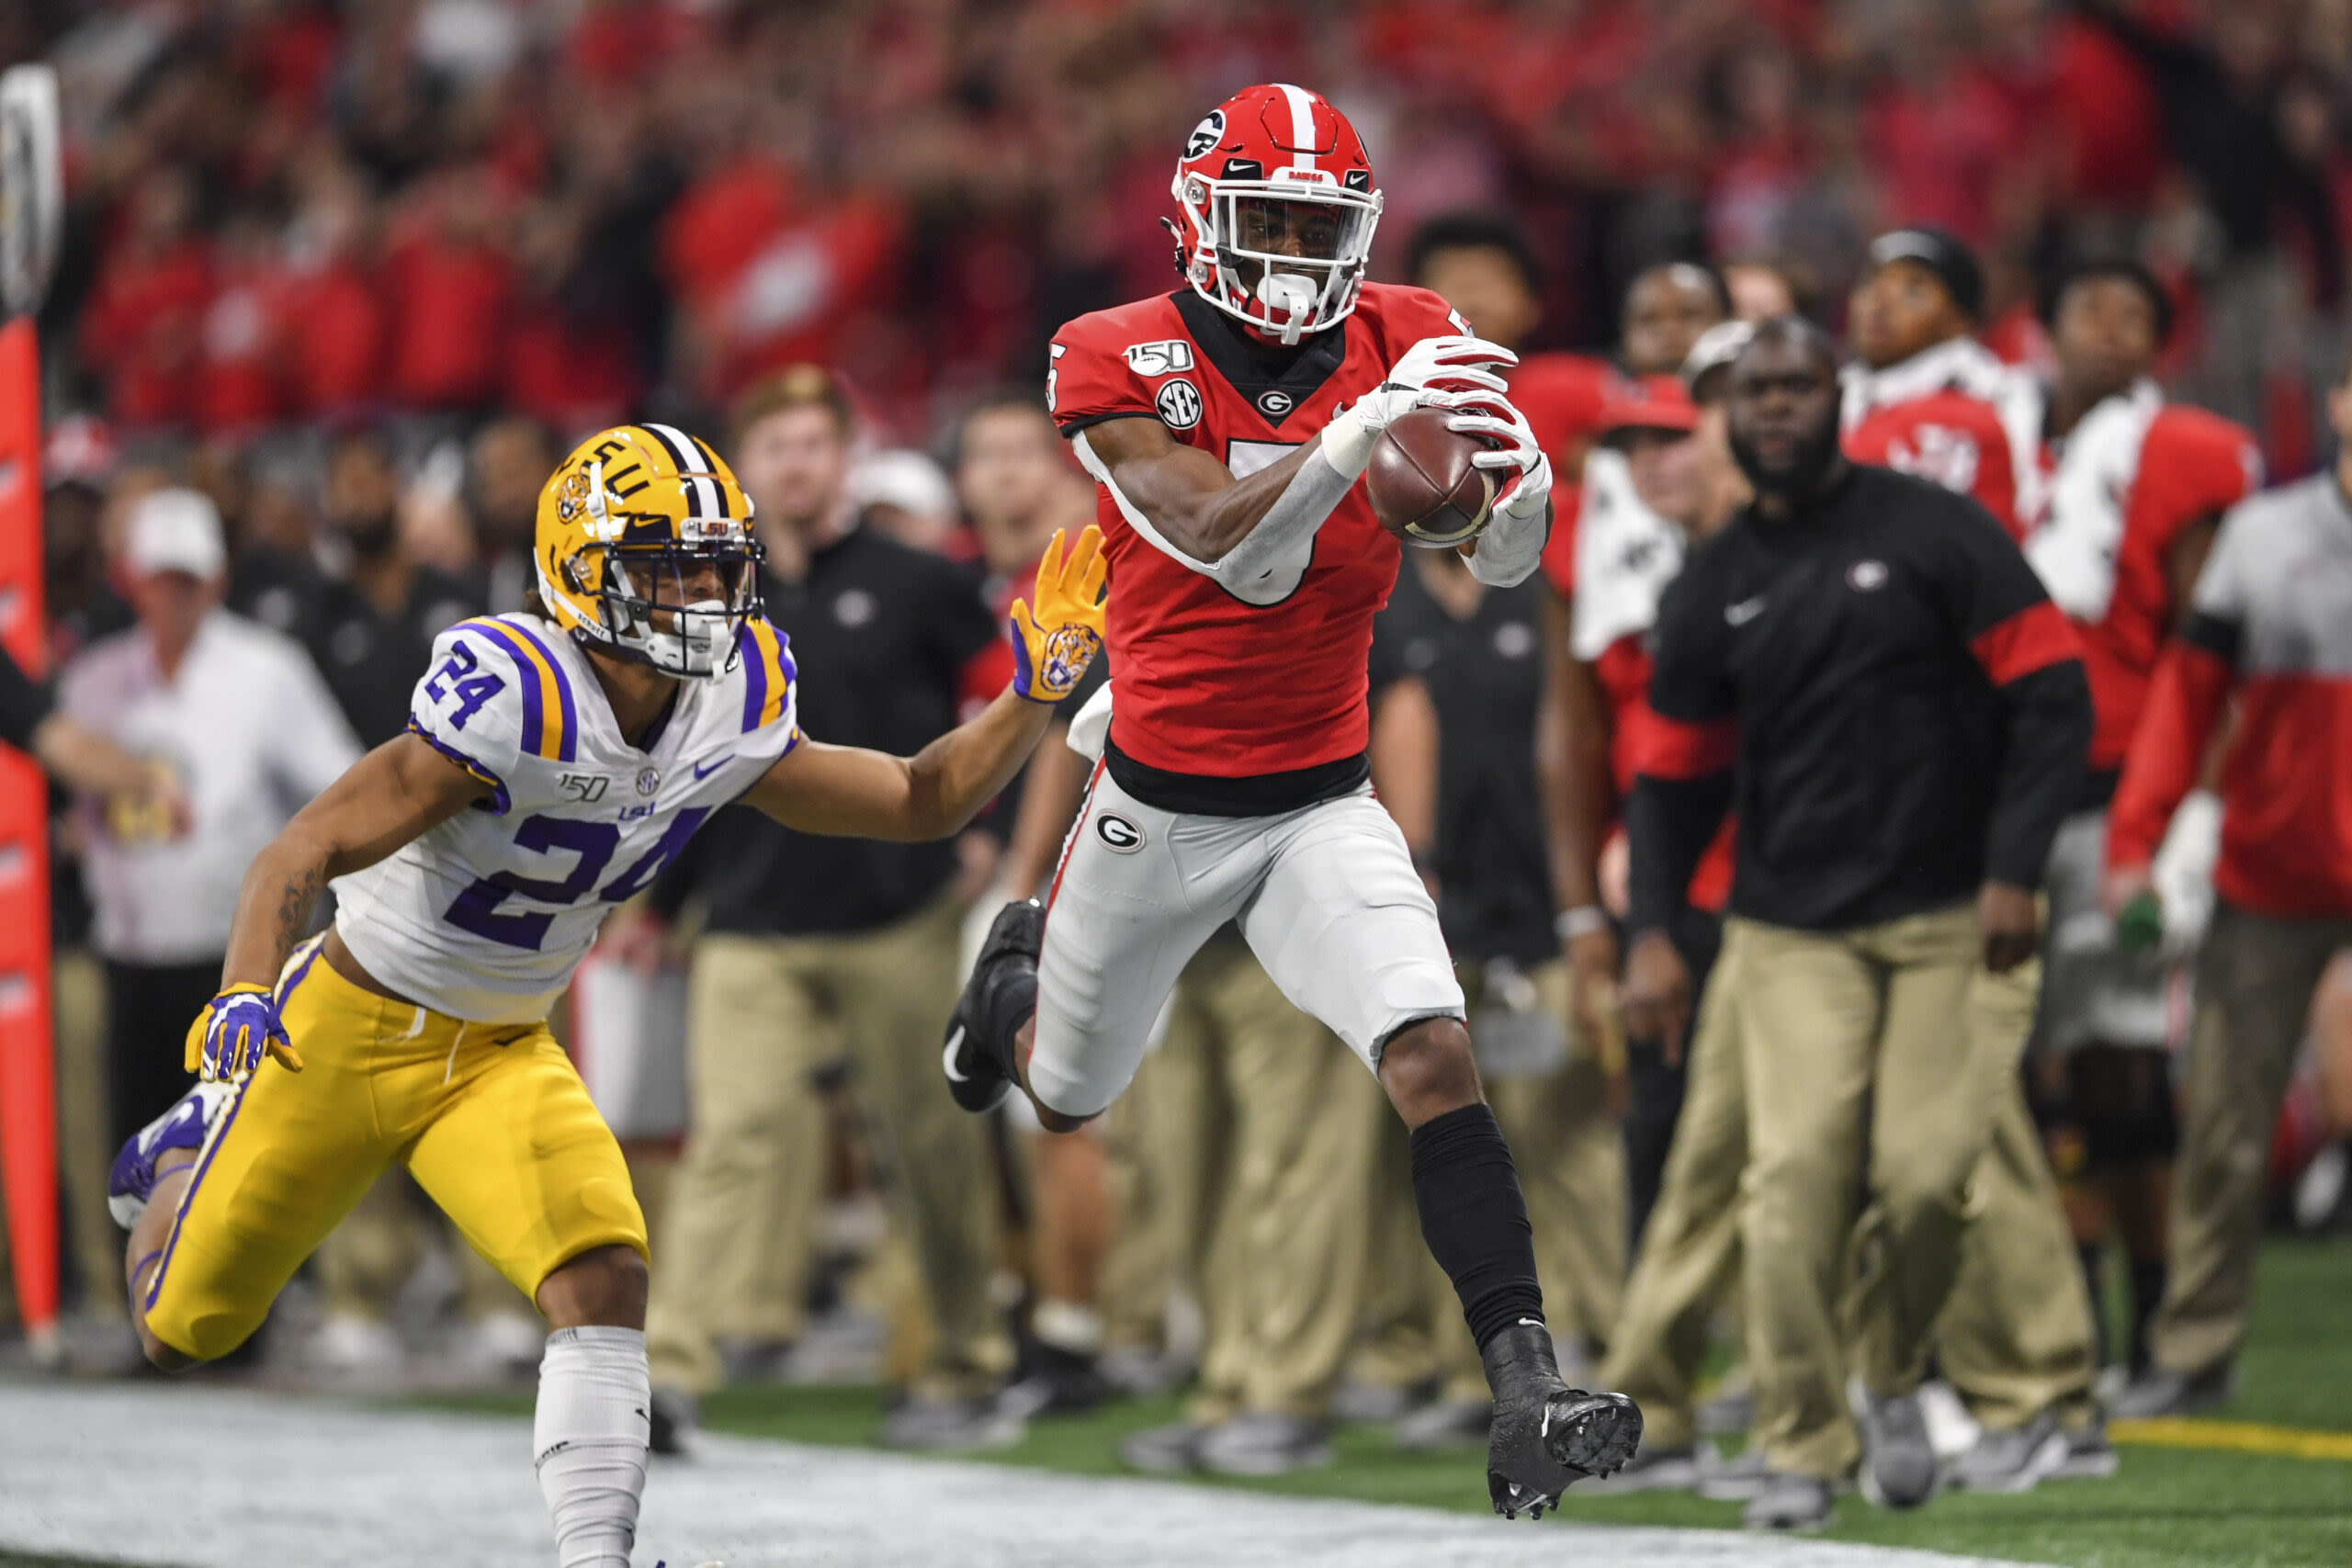 Former UGA wide receiver signs with the Browns